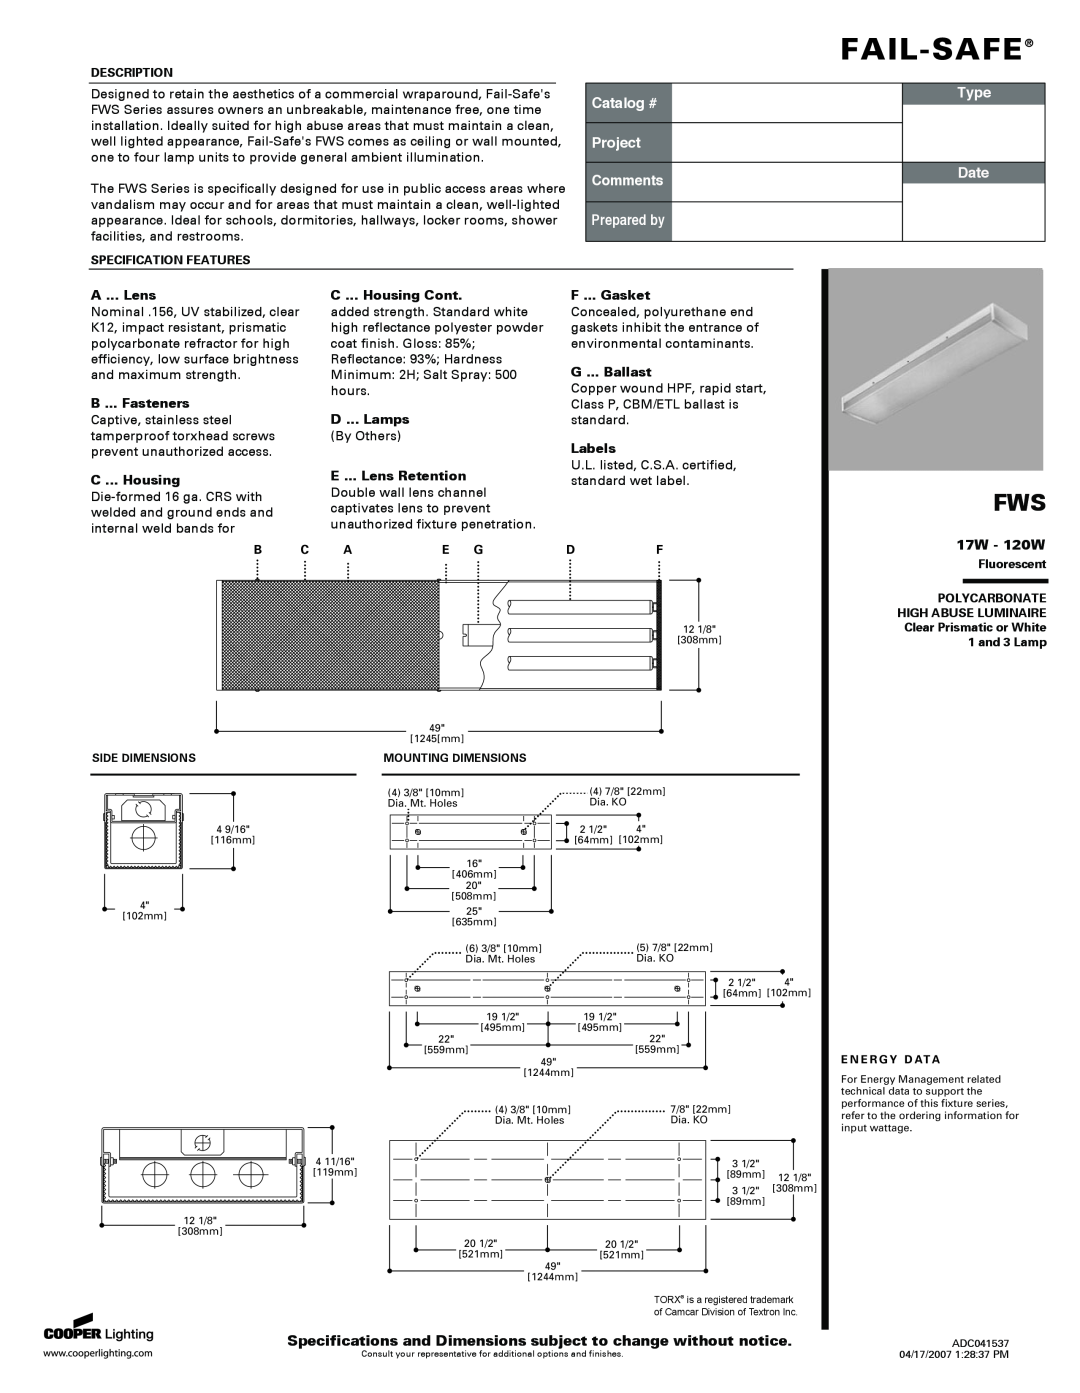 Cooper Lighting ADC041537 specifications 17W - 120W, A ... Lens, B ... Fasteners, C ... Housing Cont, D ... Lamps, Labels 